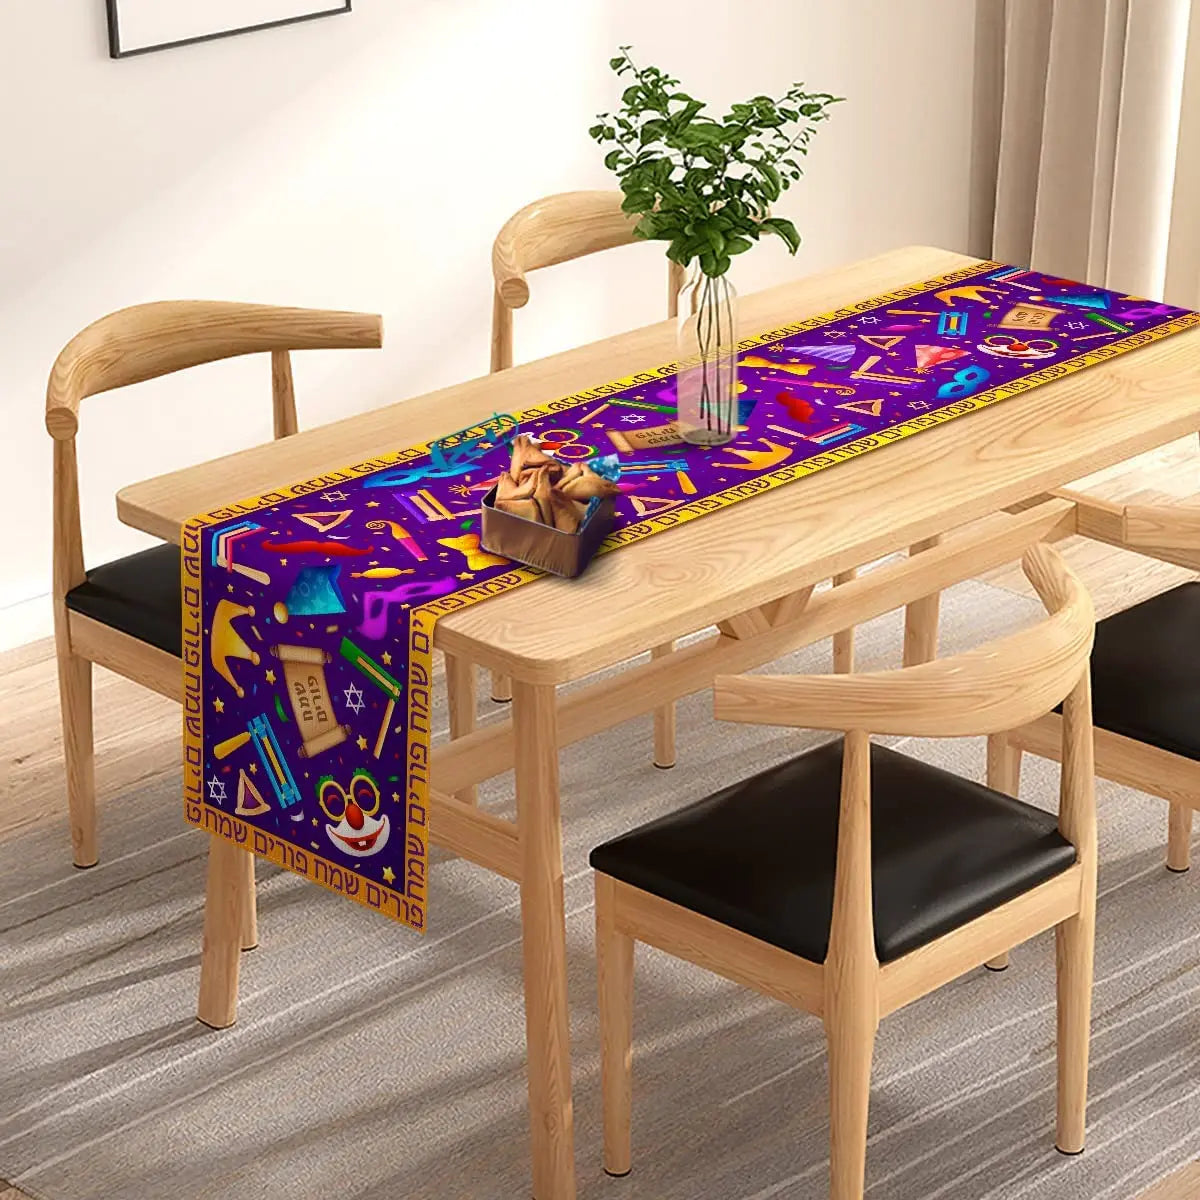 Happy Purim Table Runner Jewish Carnival Festival Holiday Decor Masque Circus Clown Table Runner Kitchen Dinning Decoration